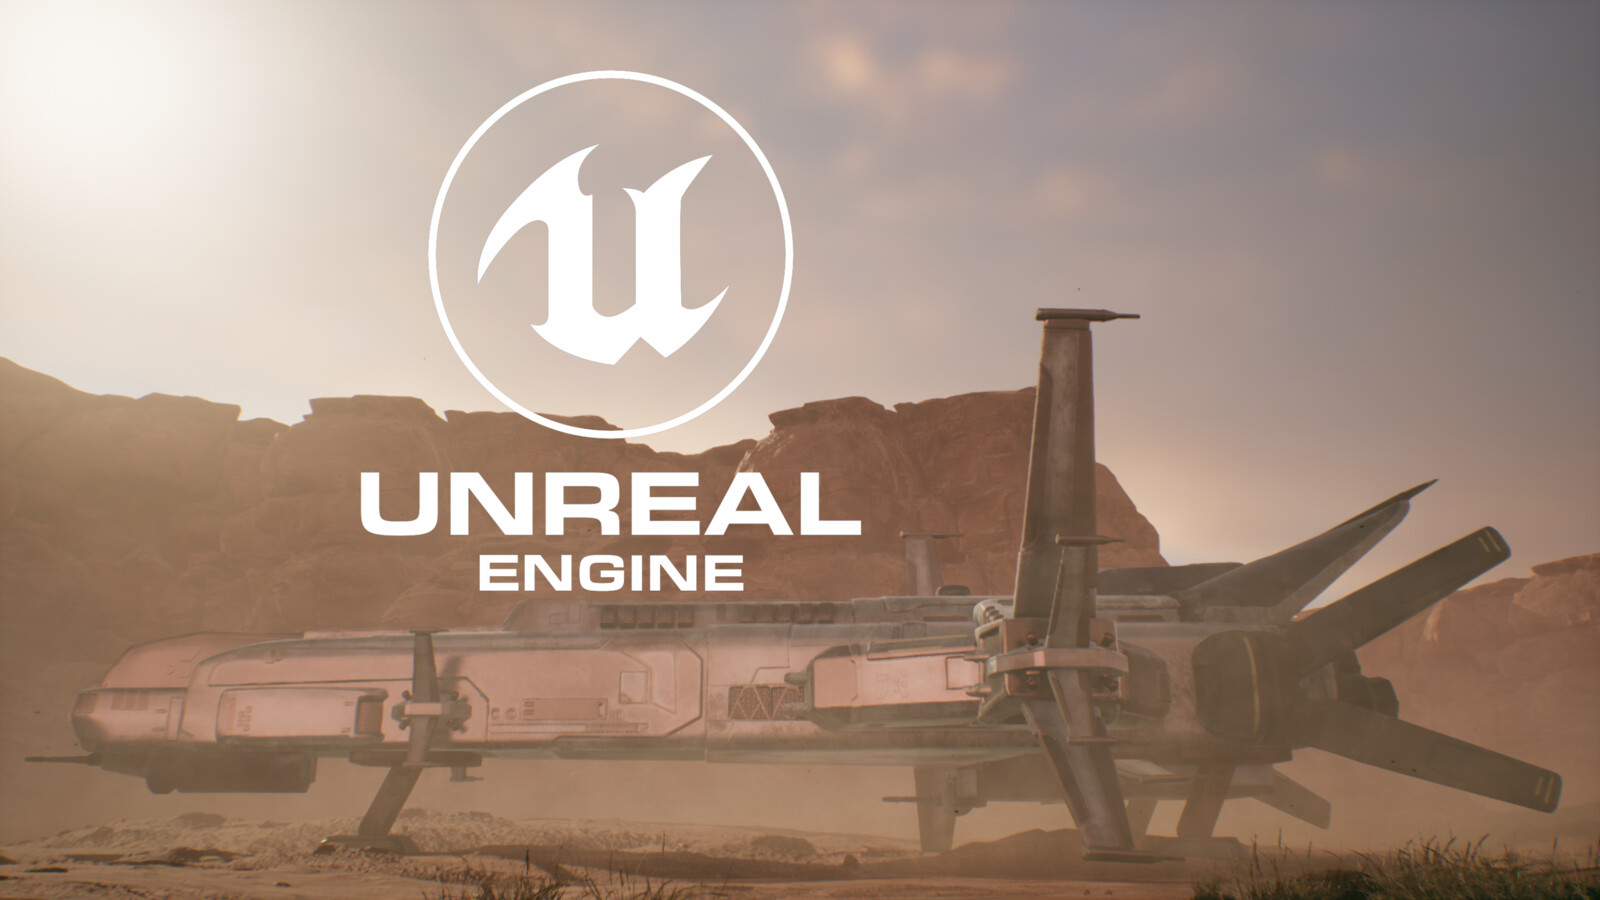 Space Ship Unreal Engine